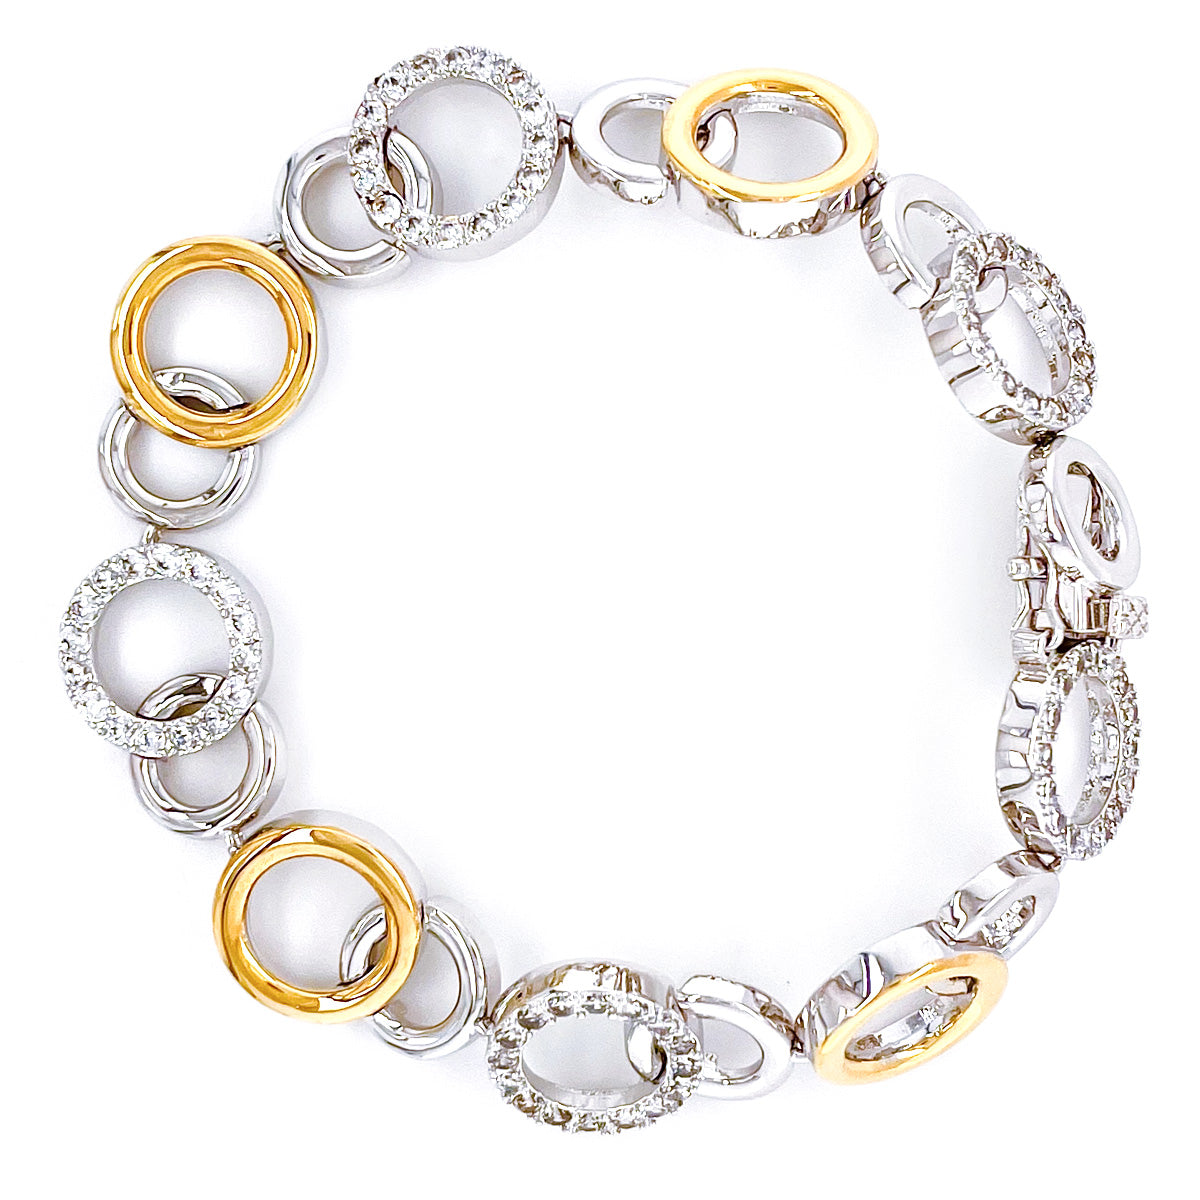 BMB60190 - Gold And Silver - Bracelet